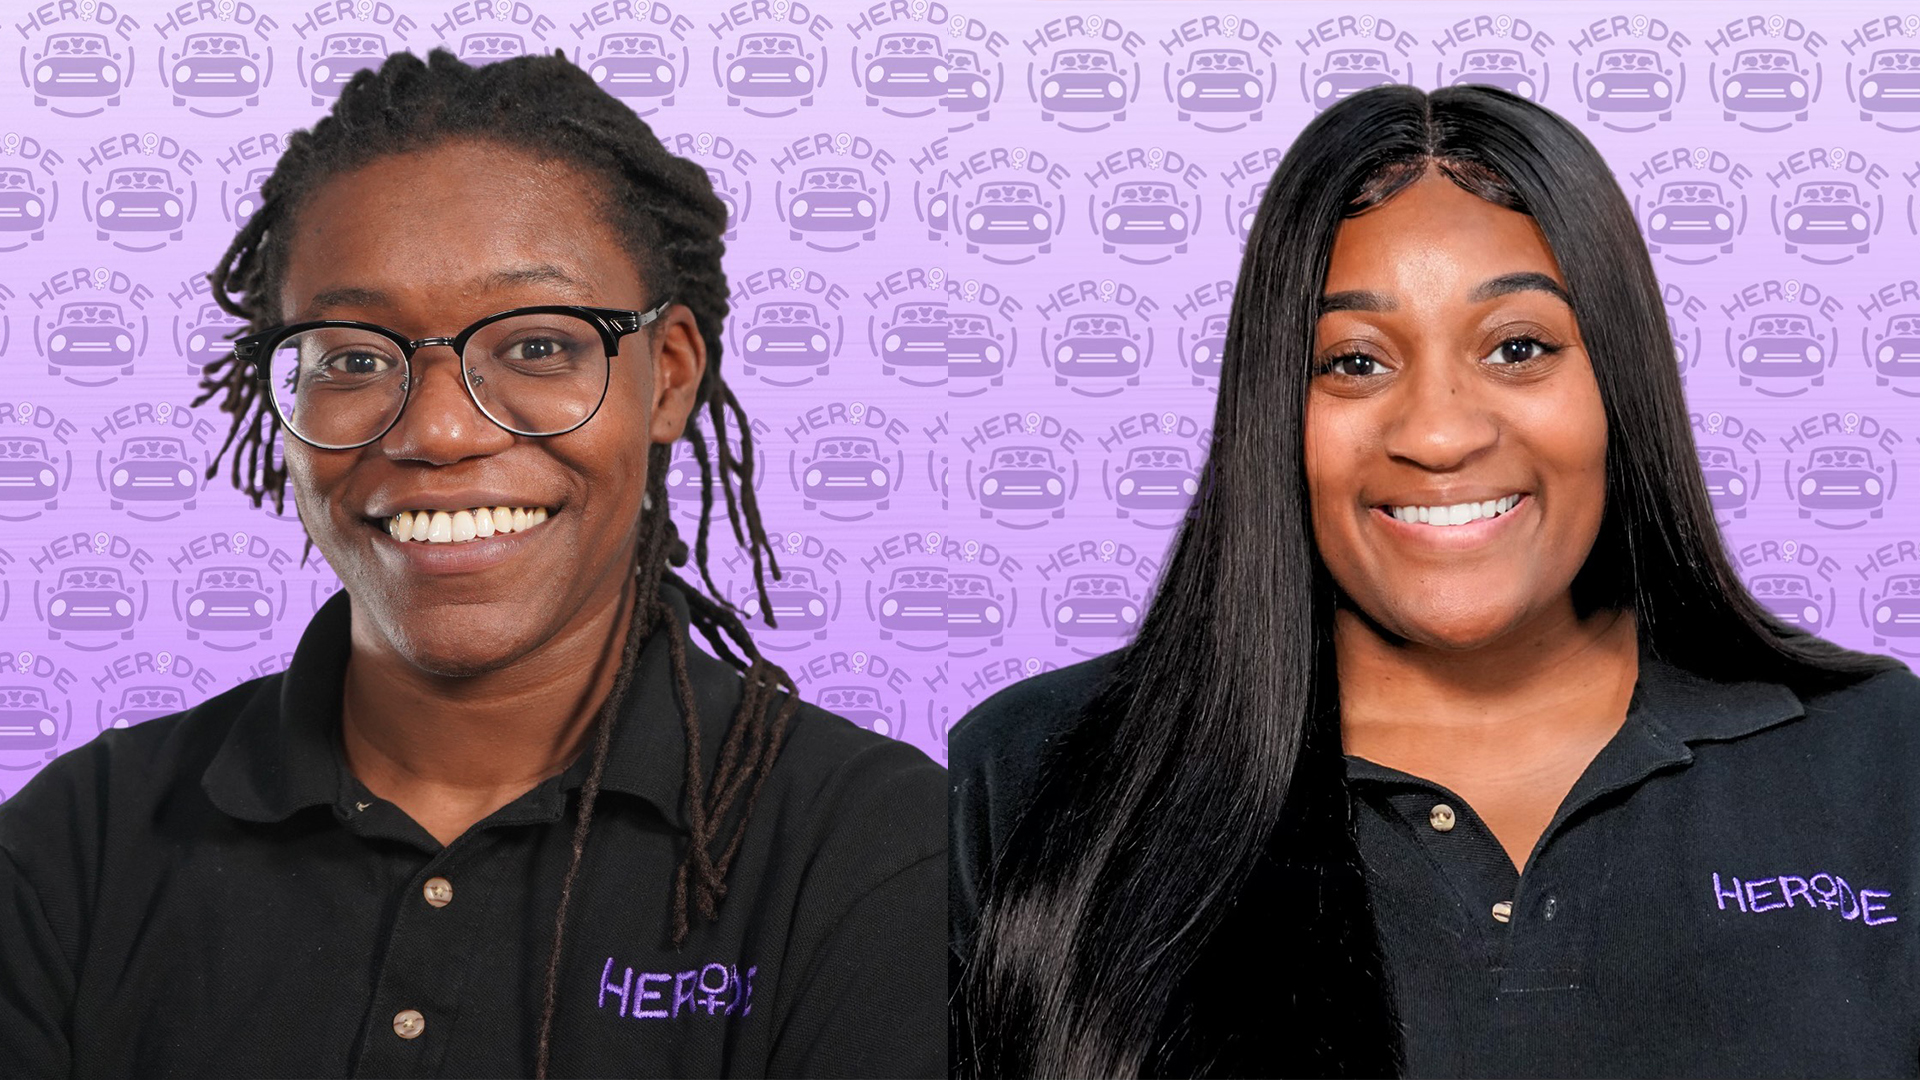 HERide Is The First Black-Owned Rideshare Company To Secure A Contract With Hartsfield-Jackson Atlanta International Airport